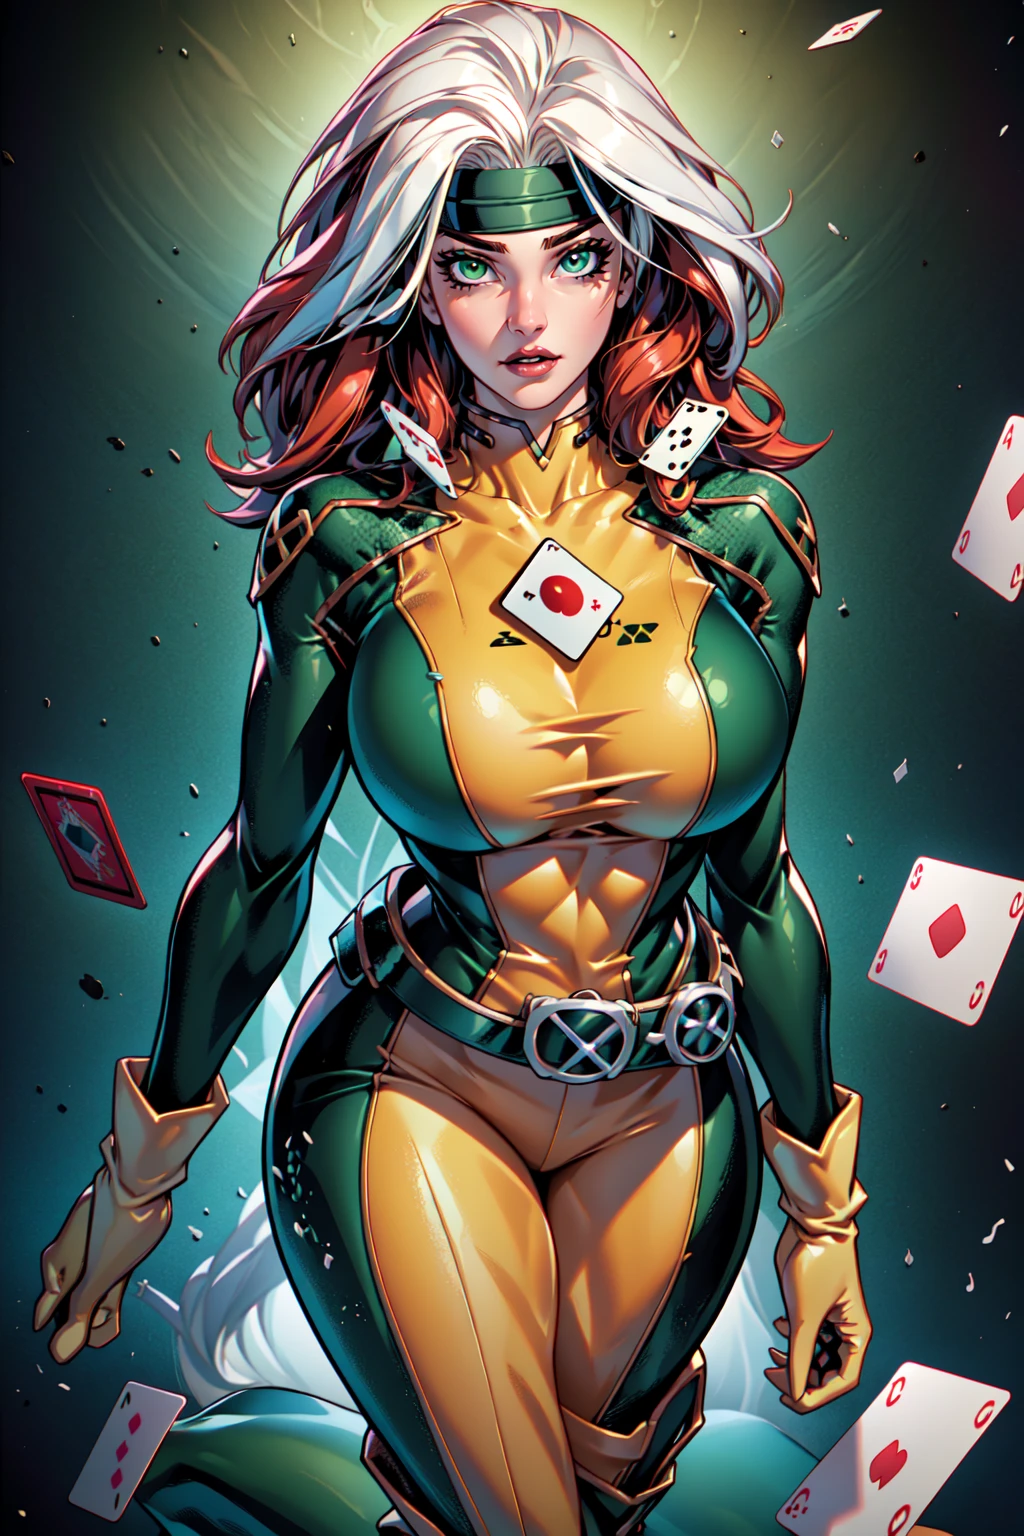 Savage, Classic, Southern Belle, Superhero, Rogue, Xtreme, looking at viewer, large breasts, boots, parted lips, belt, lips, headband, lipstick, card, playing card, spade, (shape), dyed bangs, green bodysuit, EarthPorcelain, 